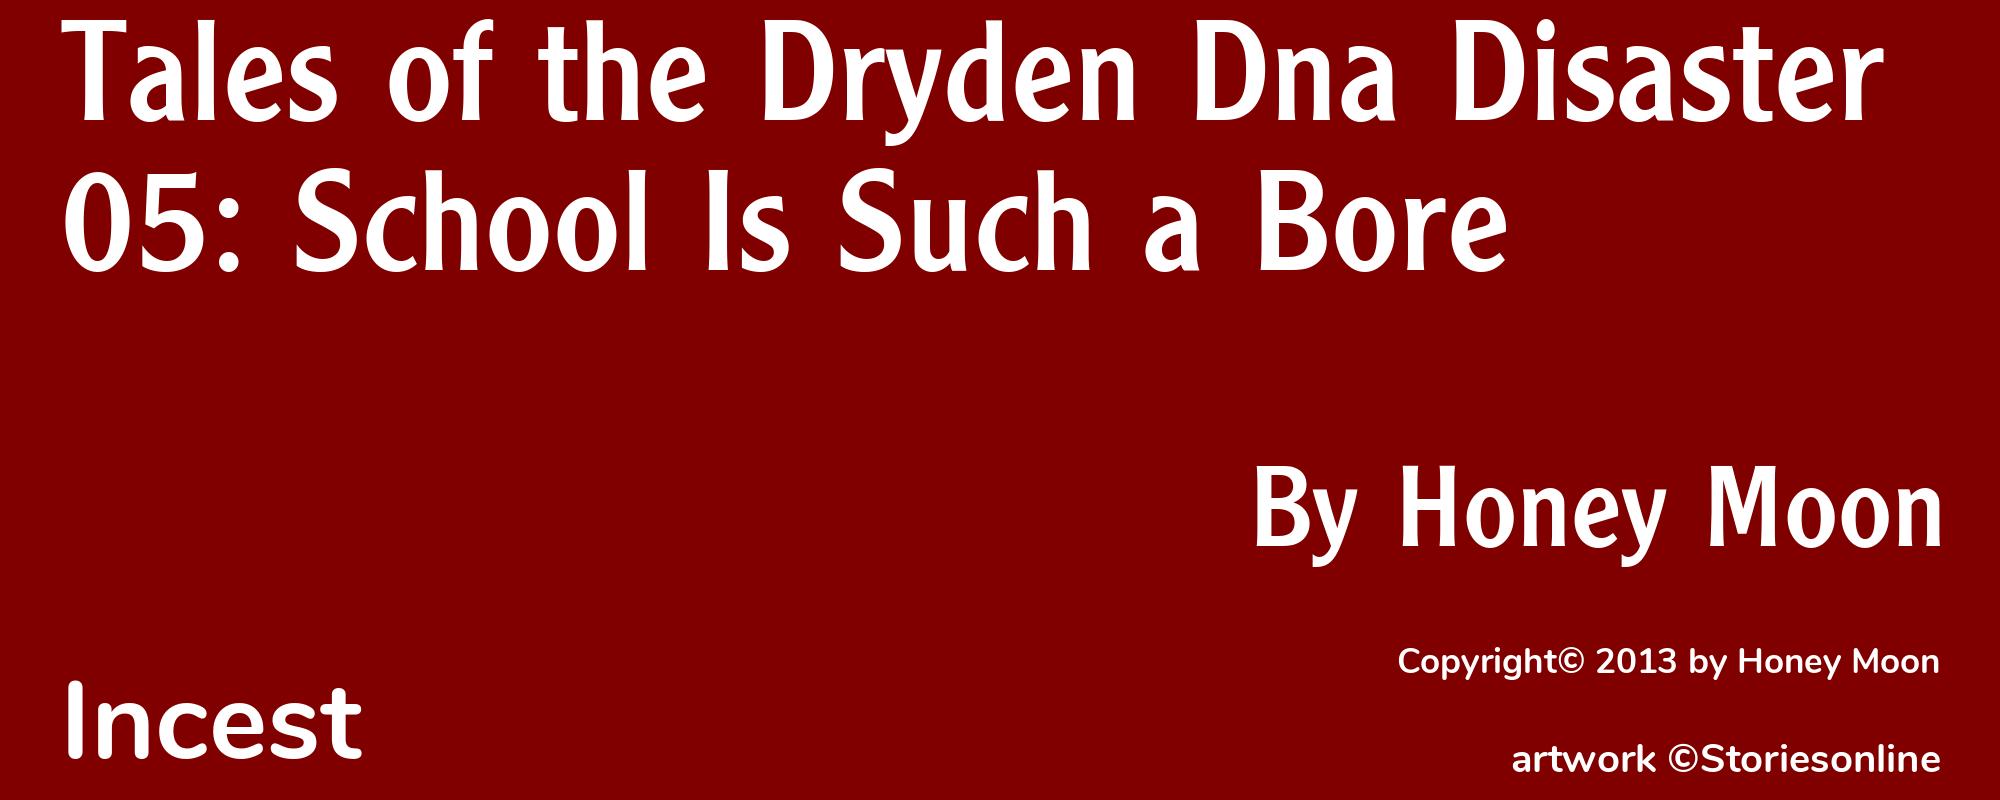 Tales of the Dryden Dna Disaster 05: School Is Such a Bore - Cover